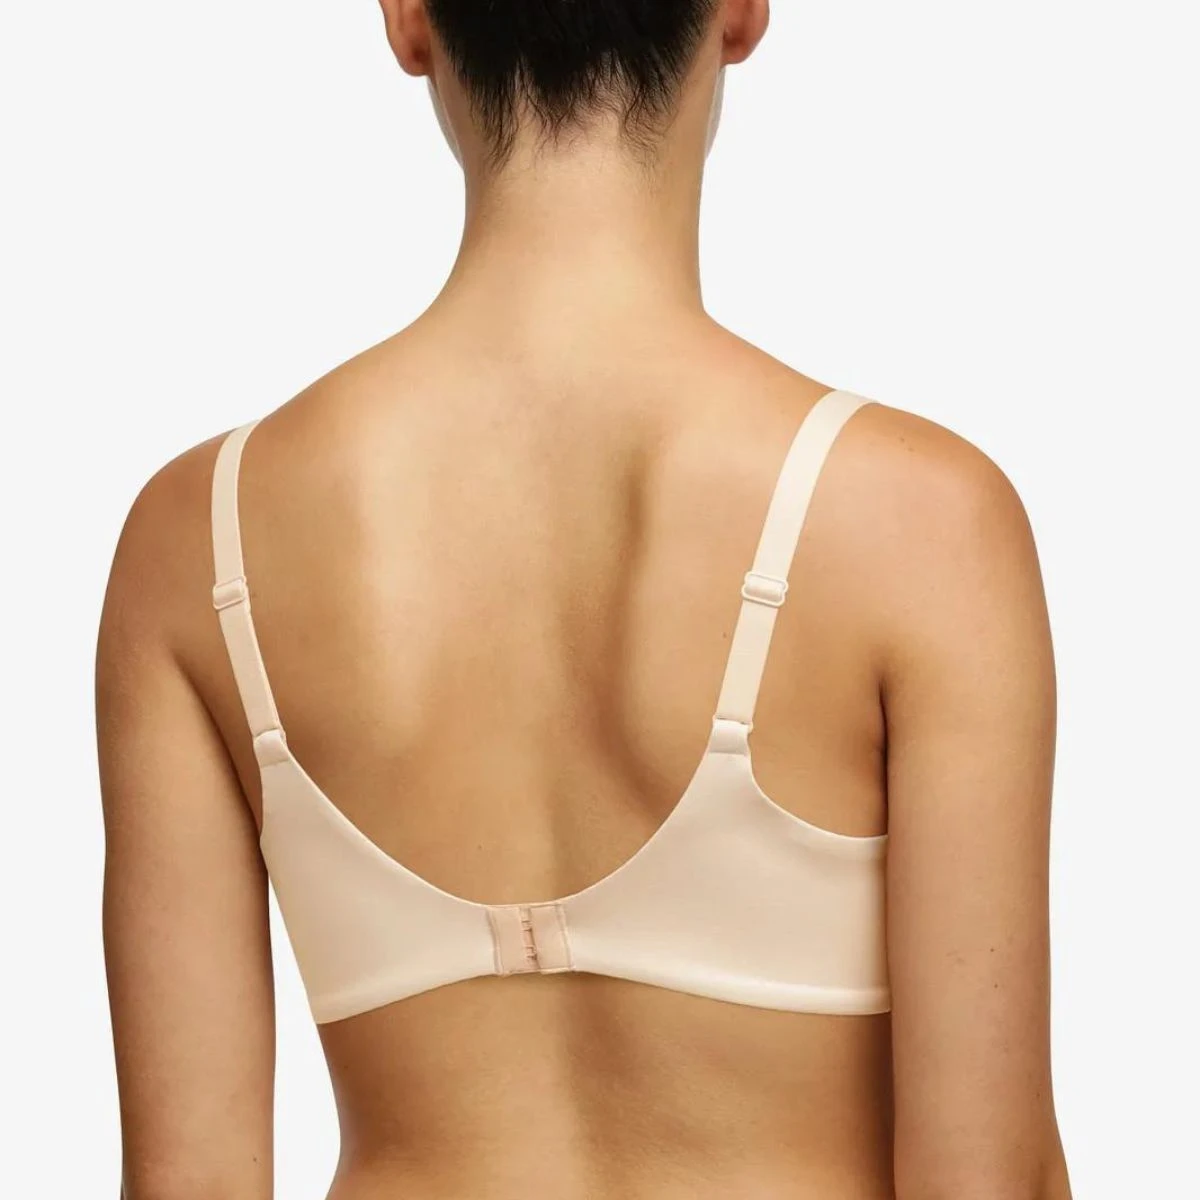 CHANTELLE Thong FLORAL TOUCH in nude